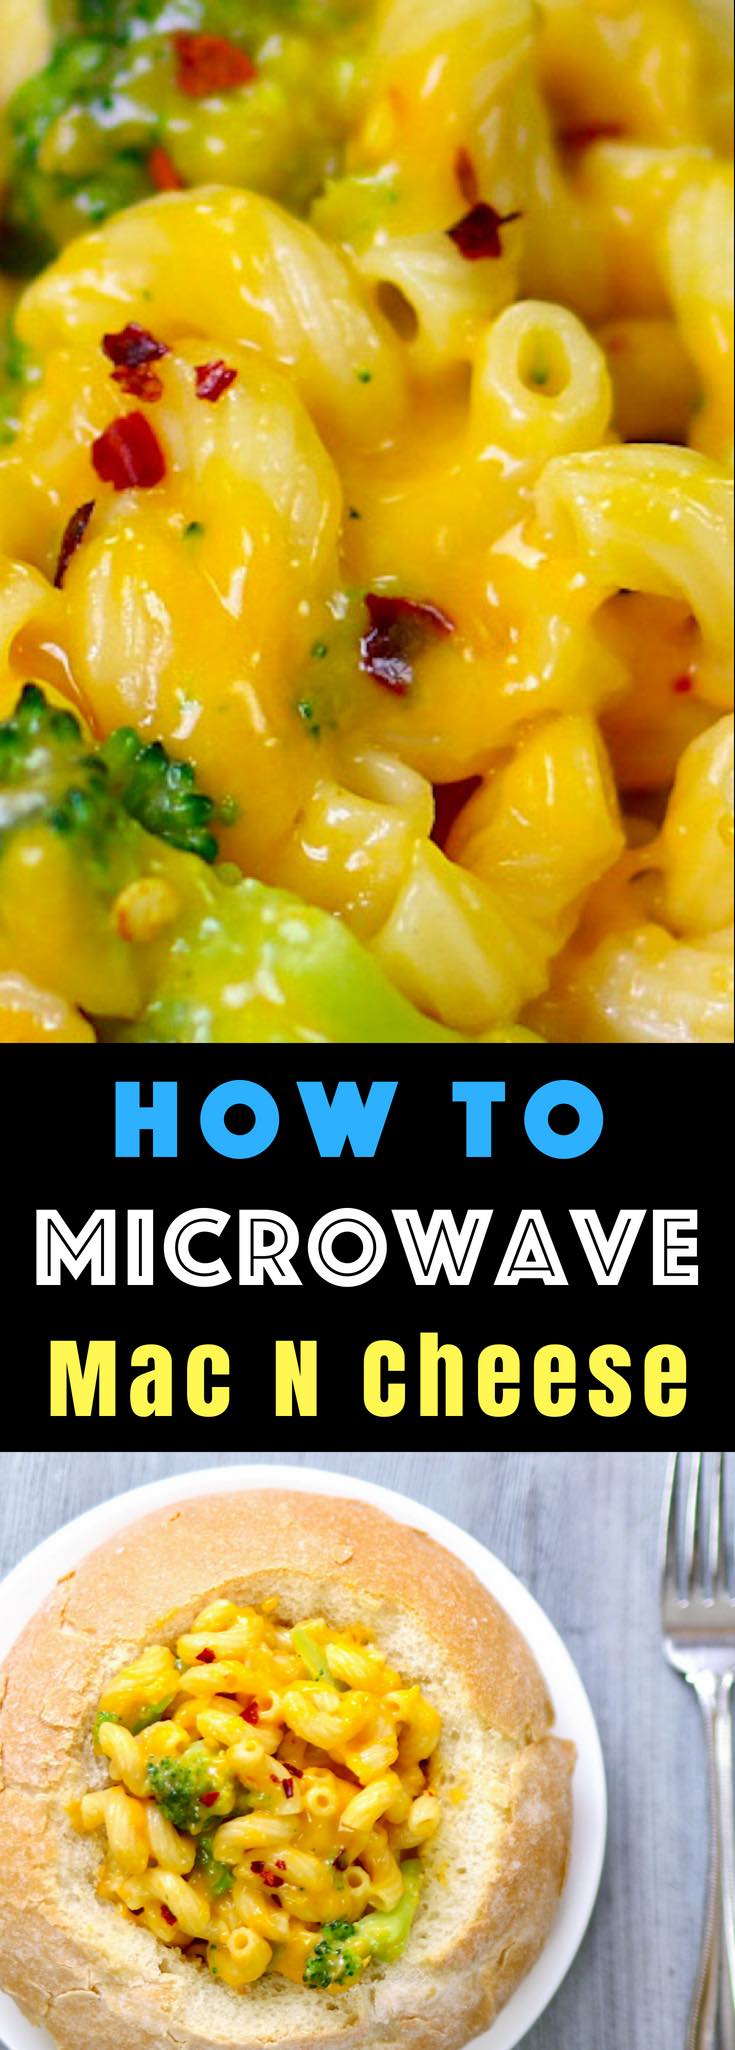 Microwave Mac and Cheese – rich and creamy mac and cheese cooked in microwave from scratch, ready in 15 minutes. A total game changer! All you need is a few simple ingredients: Macaroni pasta, salt, milk, garlic powder and cheddar cheese. Quick, easy and cooked in one bowl. Say goodbye to the dried macaroni boxes! #MicrowaveMacAndCheese #MacNcheese